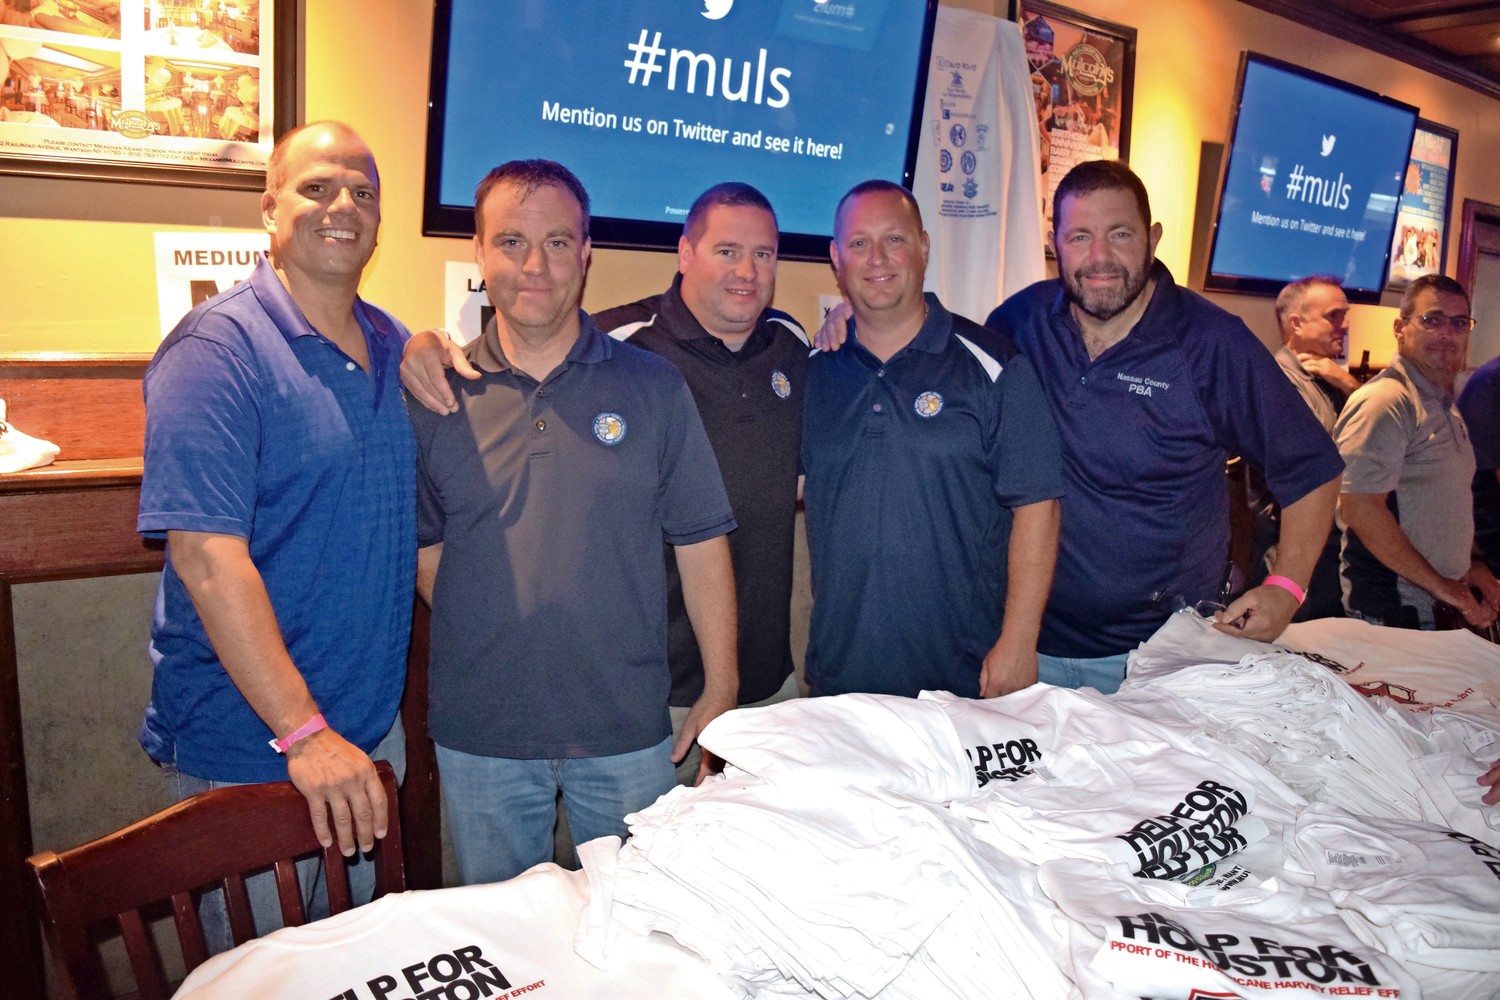 Police Benevolent Association members sold T-shirts and raffles to raise money for Help For Houston at Mulcahy’s in Wantagh.